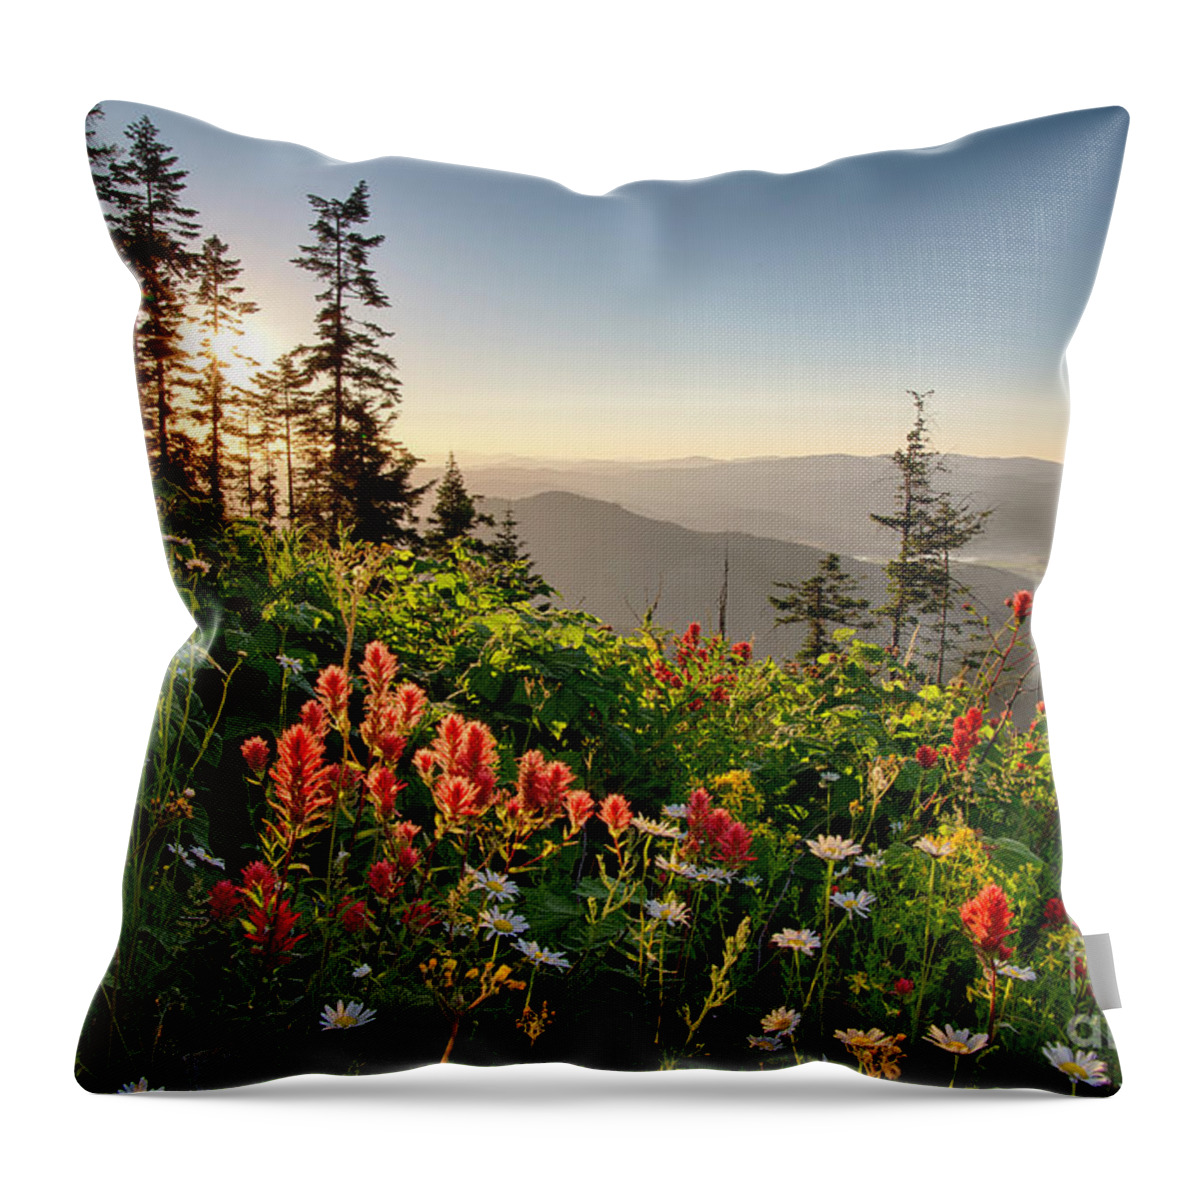 Idaho Throw Pillow featuring the photograph Wildflower View by Idaho Scenic Images Linda Lantzy